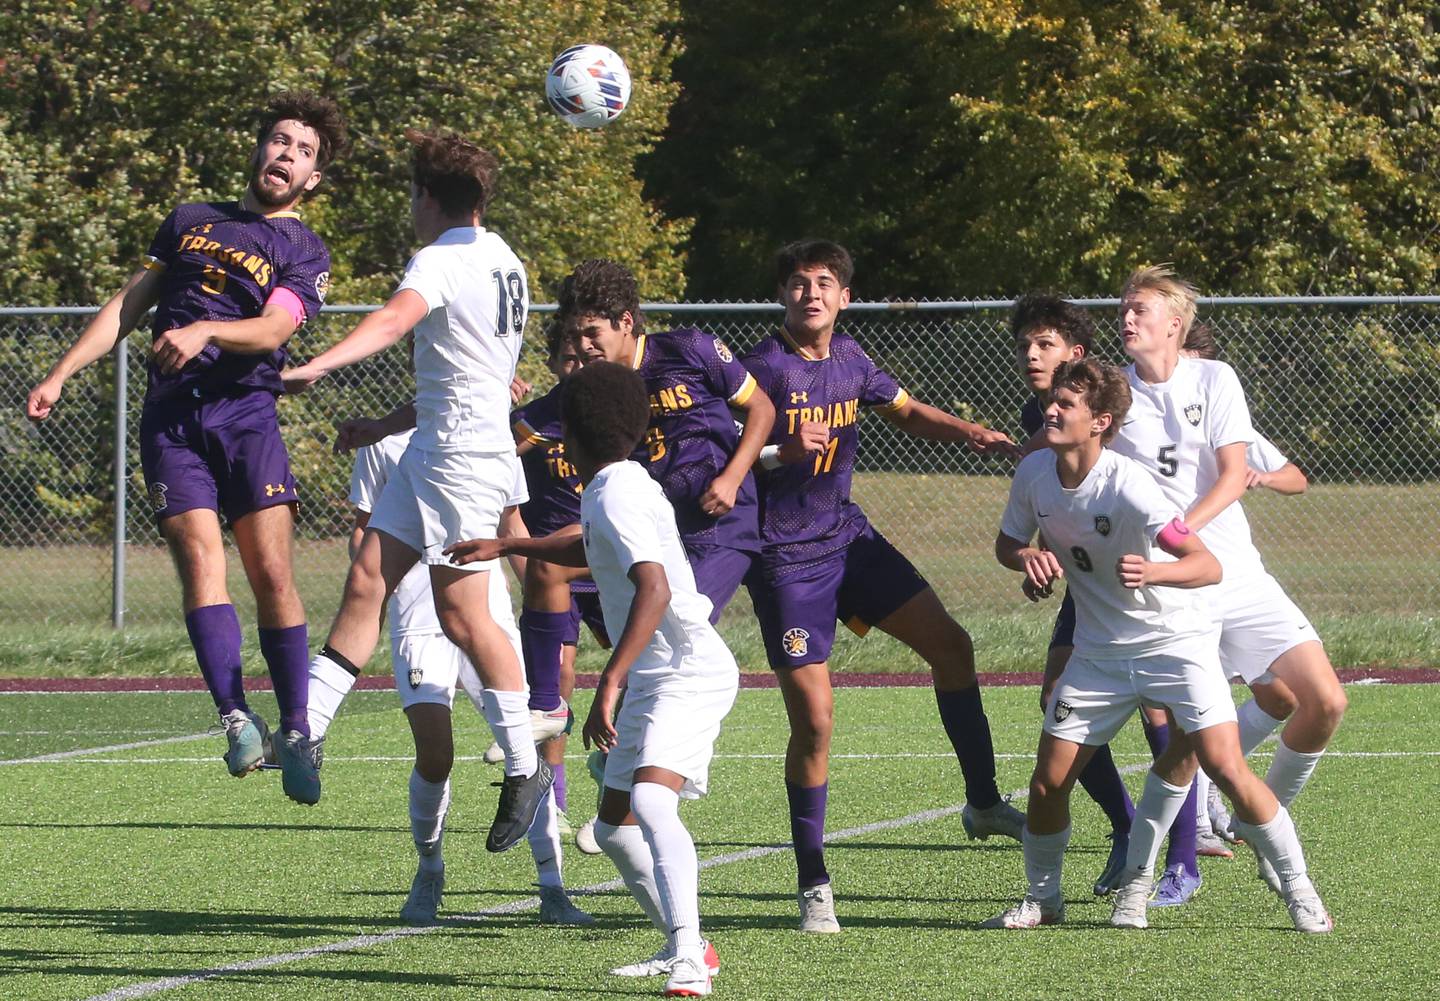 Mendota's David Casas (left) puts a header on the ball to score a goal over Quincy Notre Dame's Alex Strong in the second overtime period during the Class 1A Sectional semifinal game on Saturday, Oct. 21, 2023 at Illinois Valley Central High School in Chillicothe.